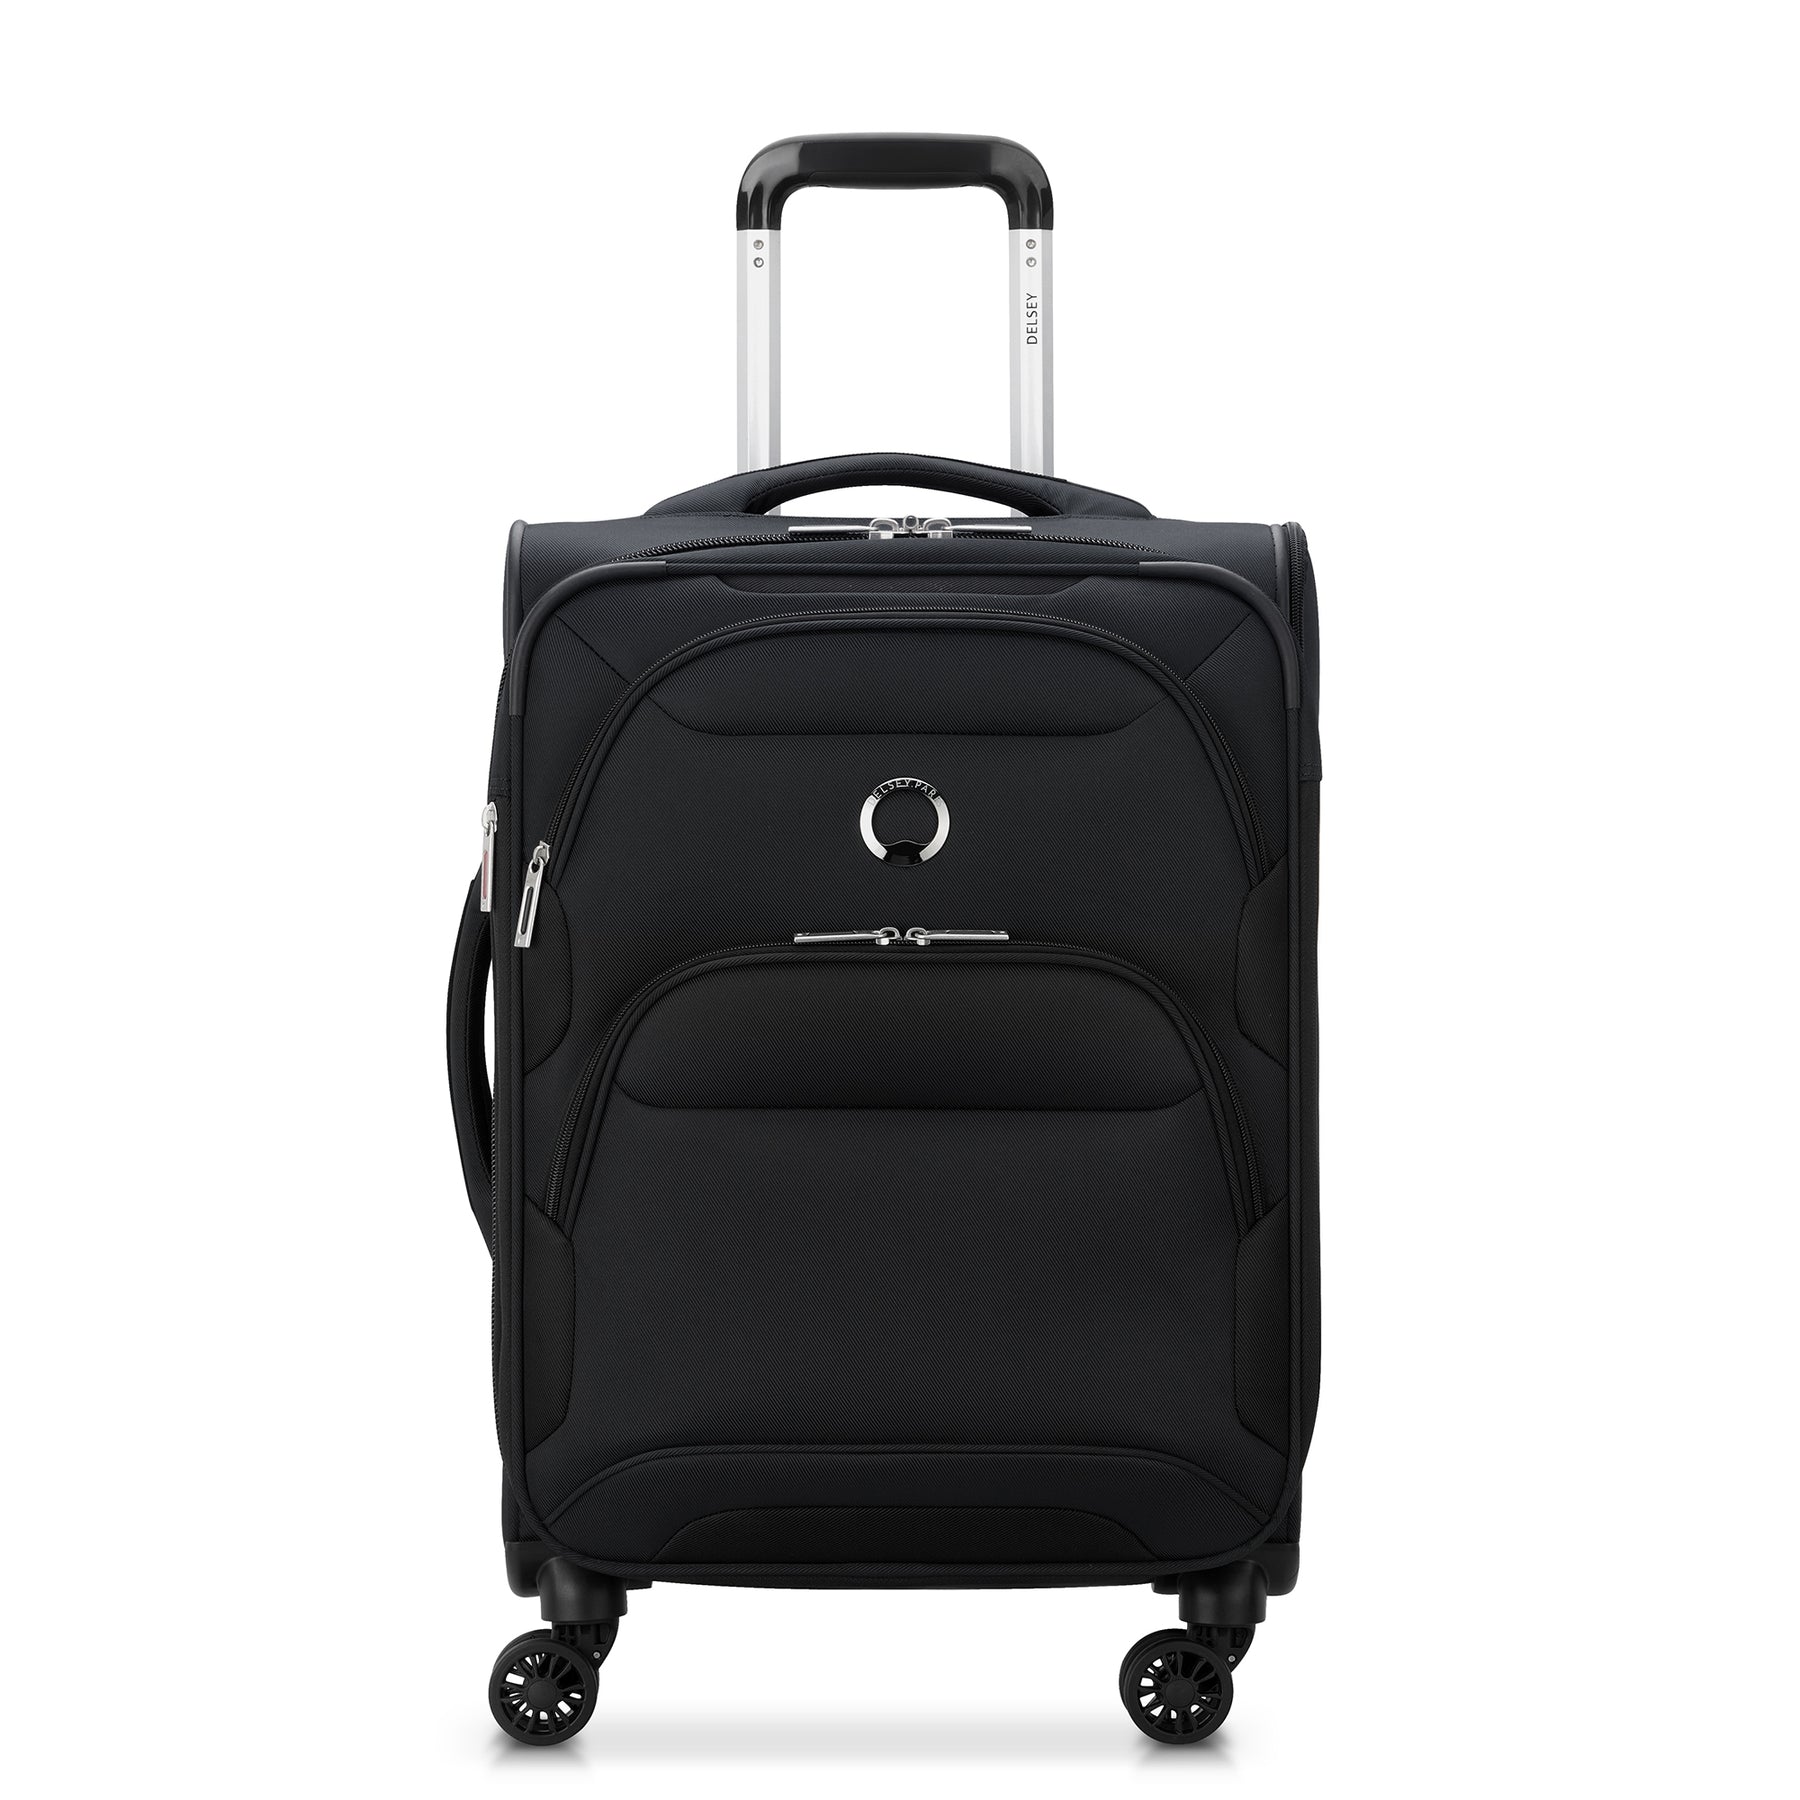 SKY MAX 2.0 CARRY-ON - 21" SMALL